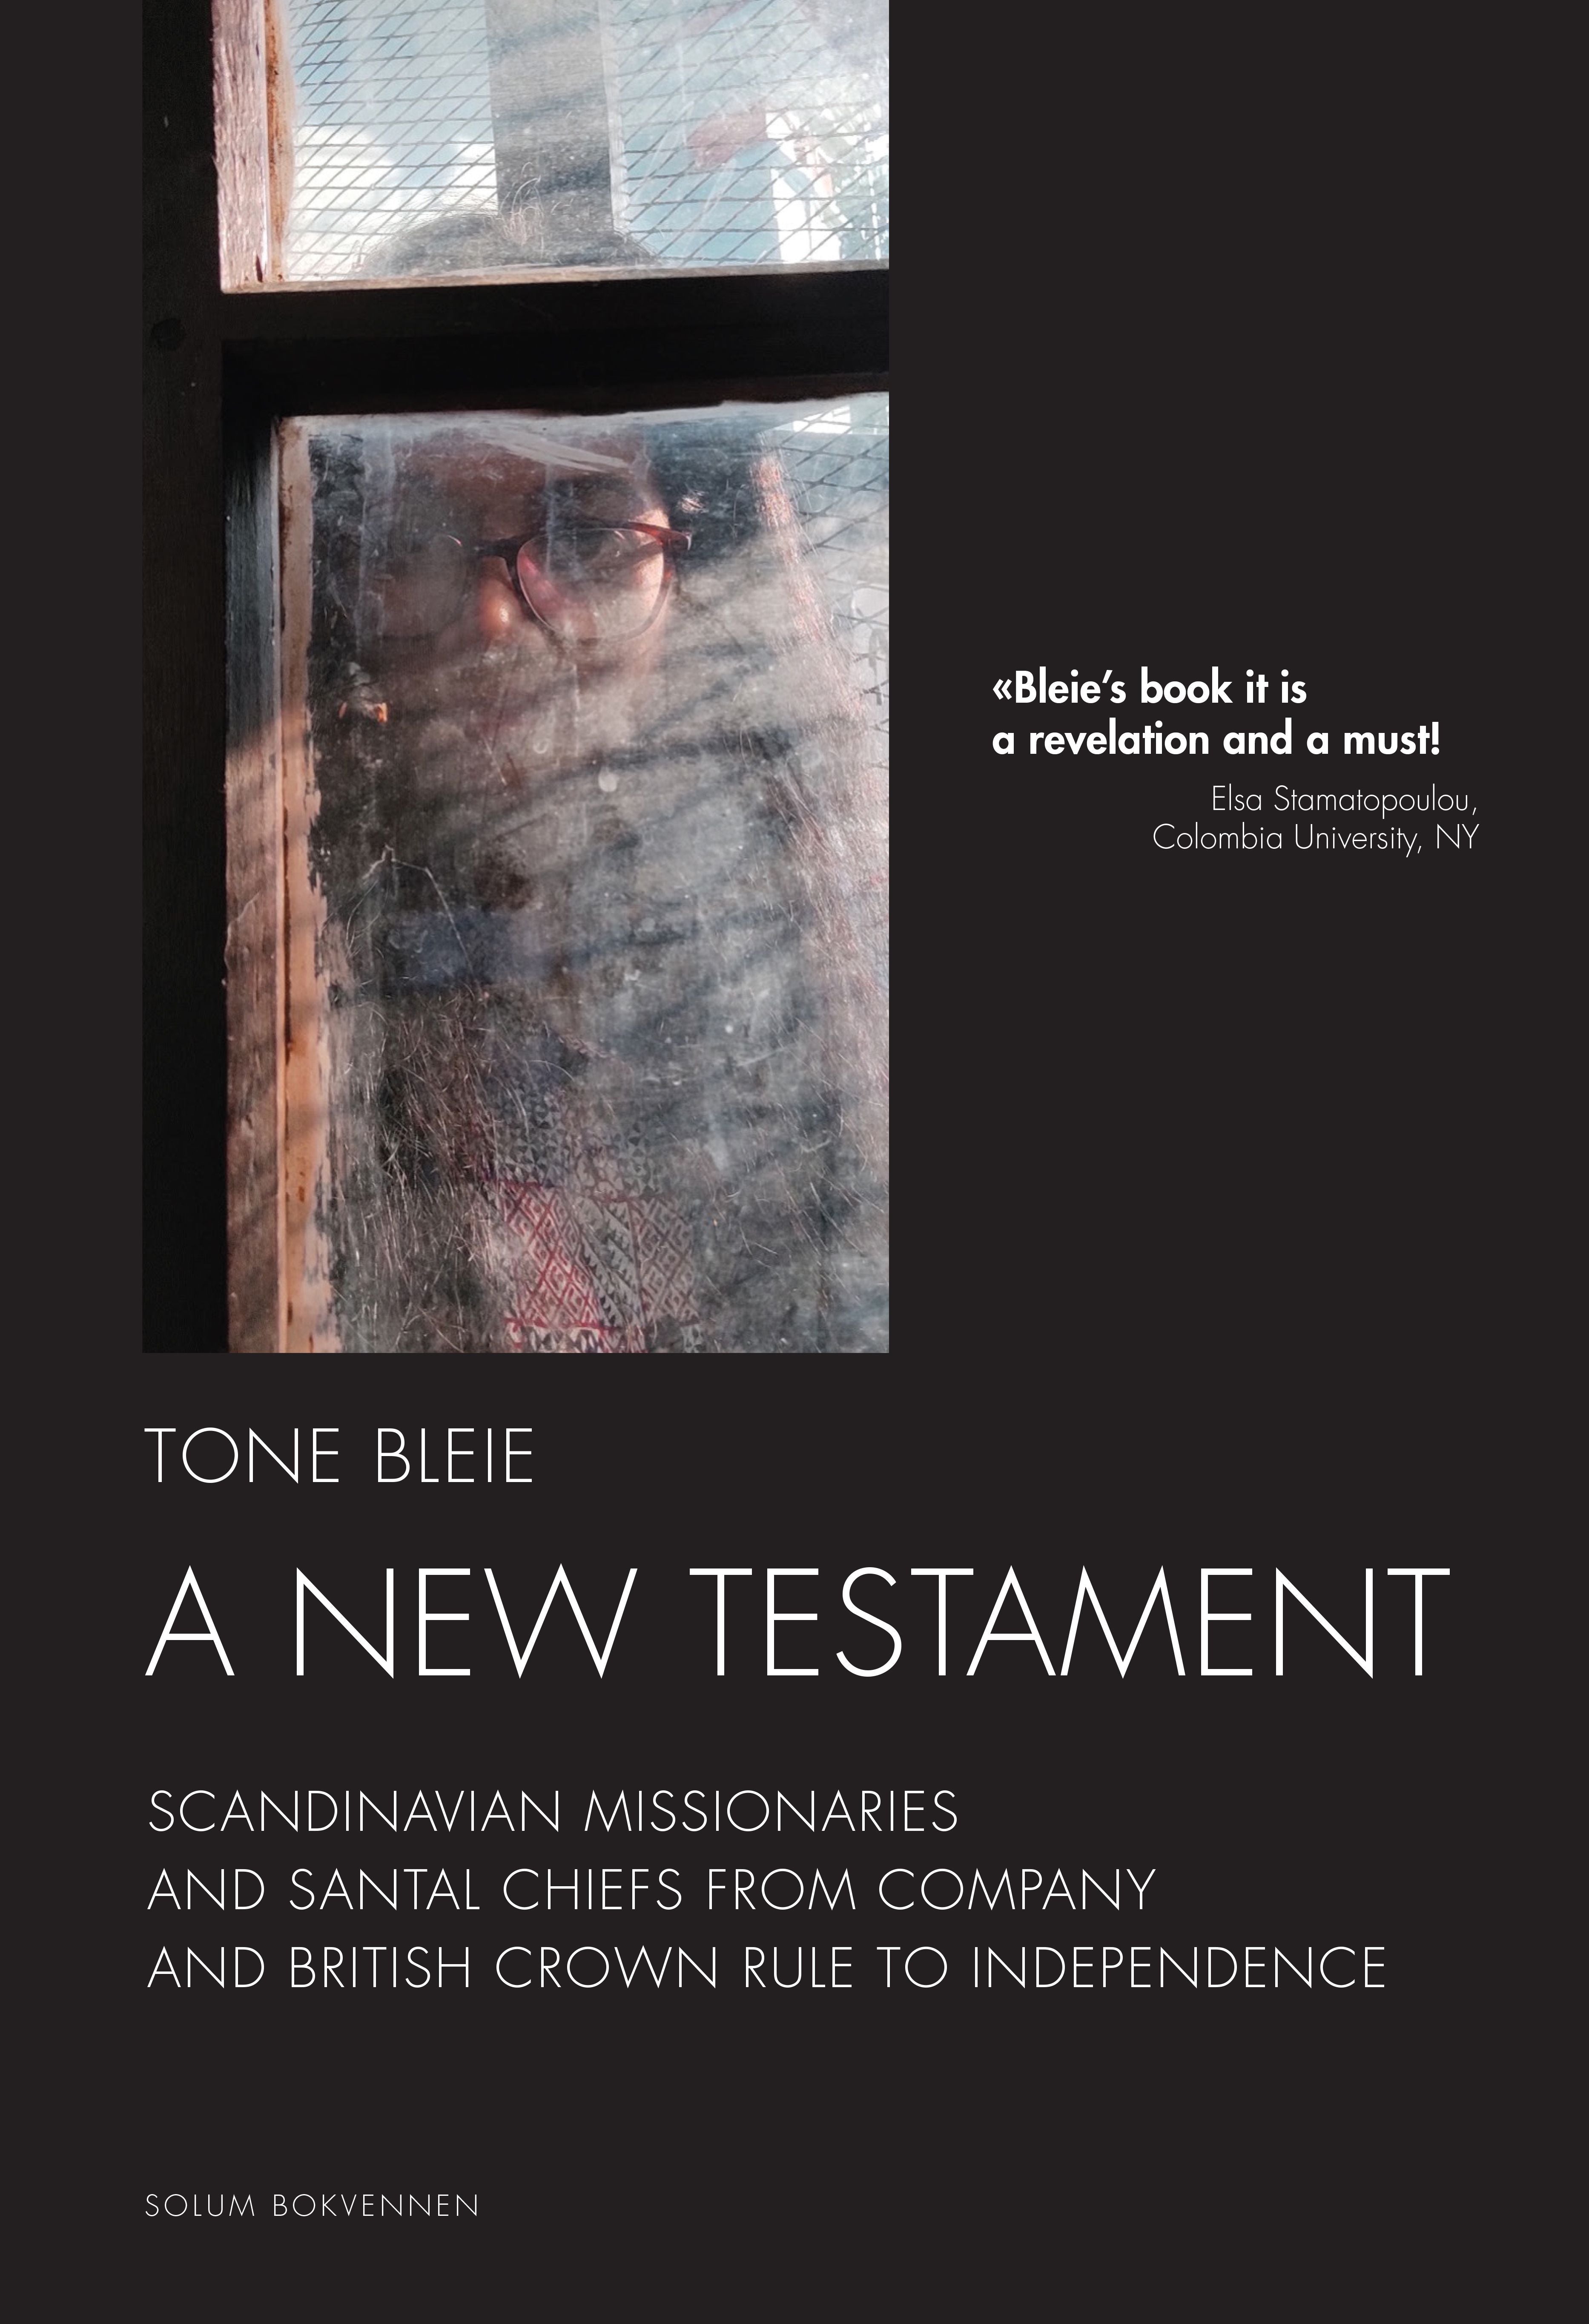 A new testament: Scandinavian missionaries and santal chiefs from company  and British crown rule to independence